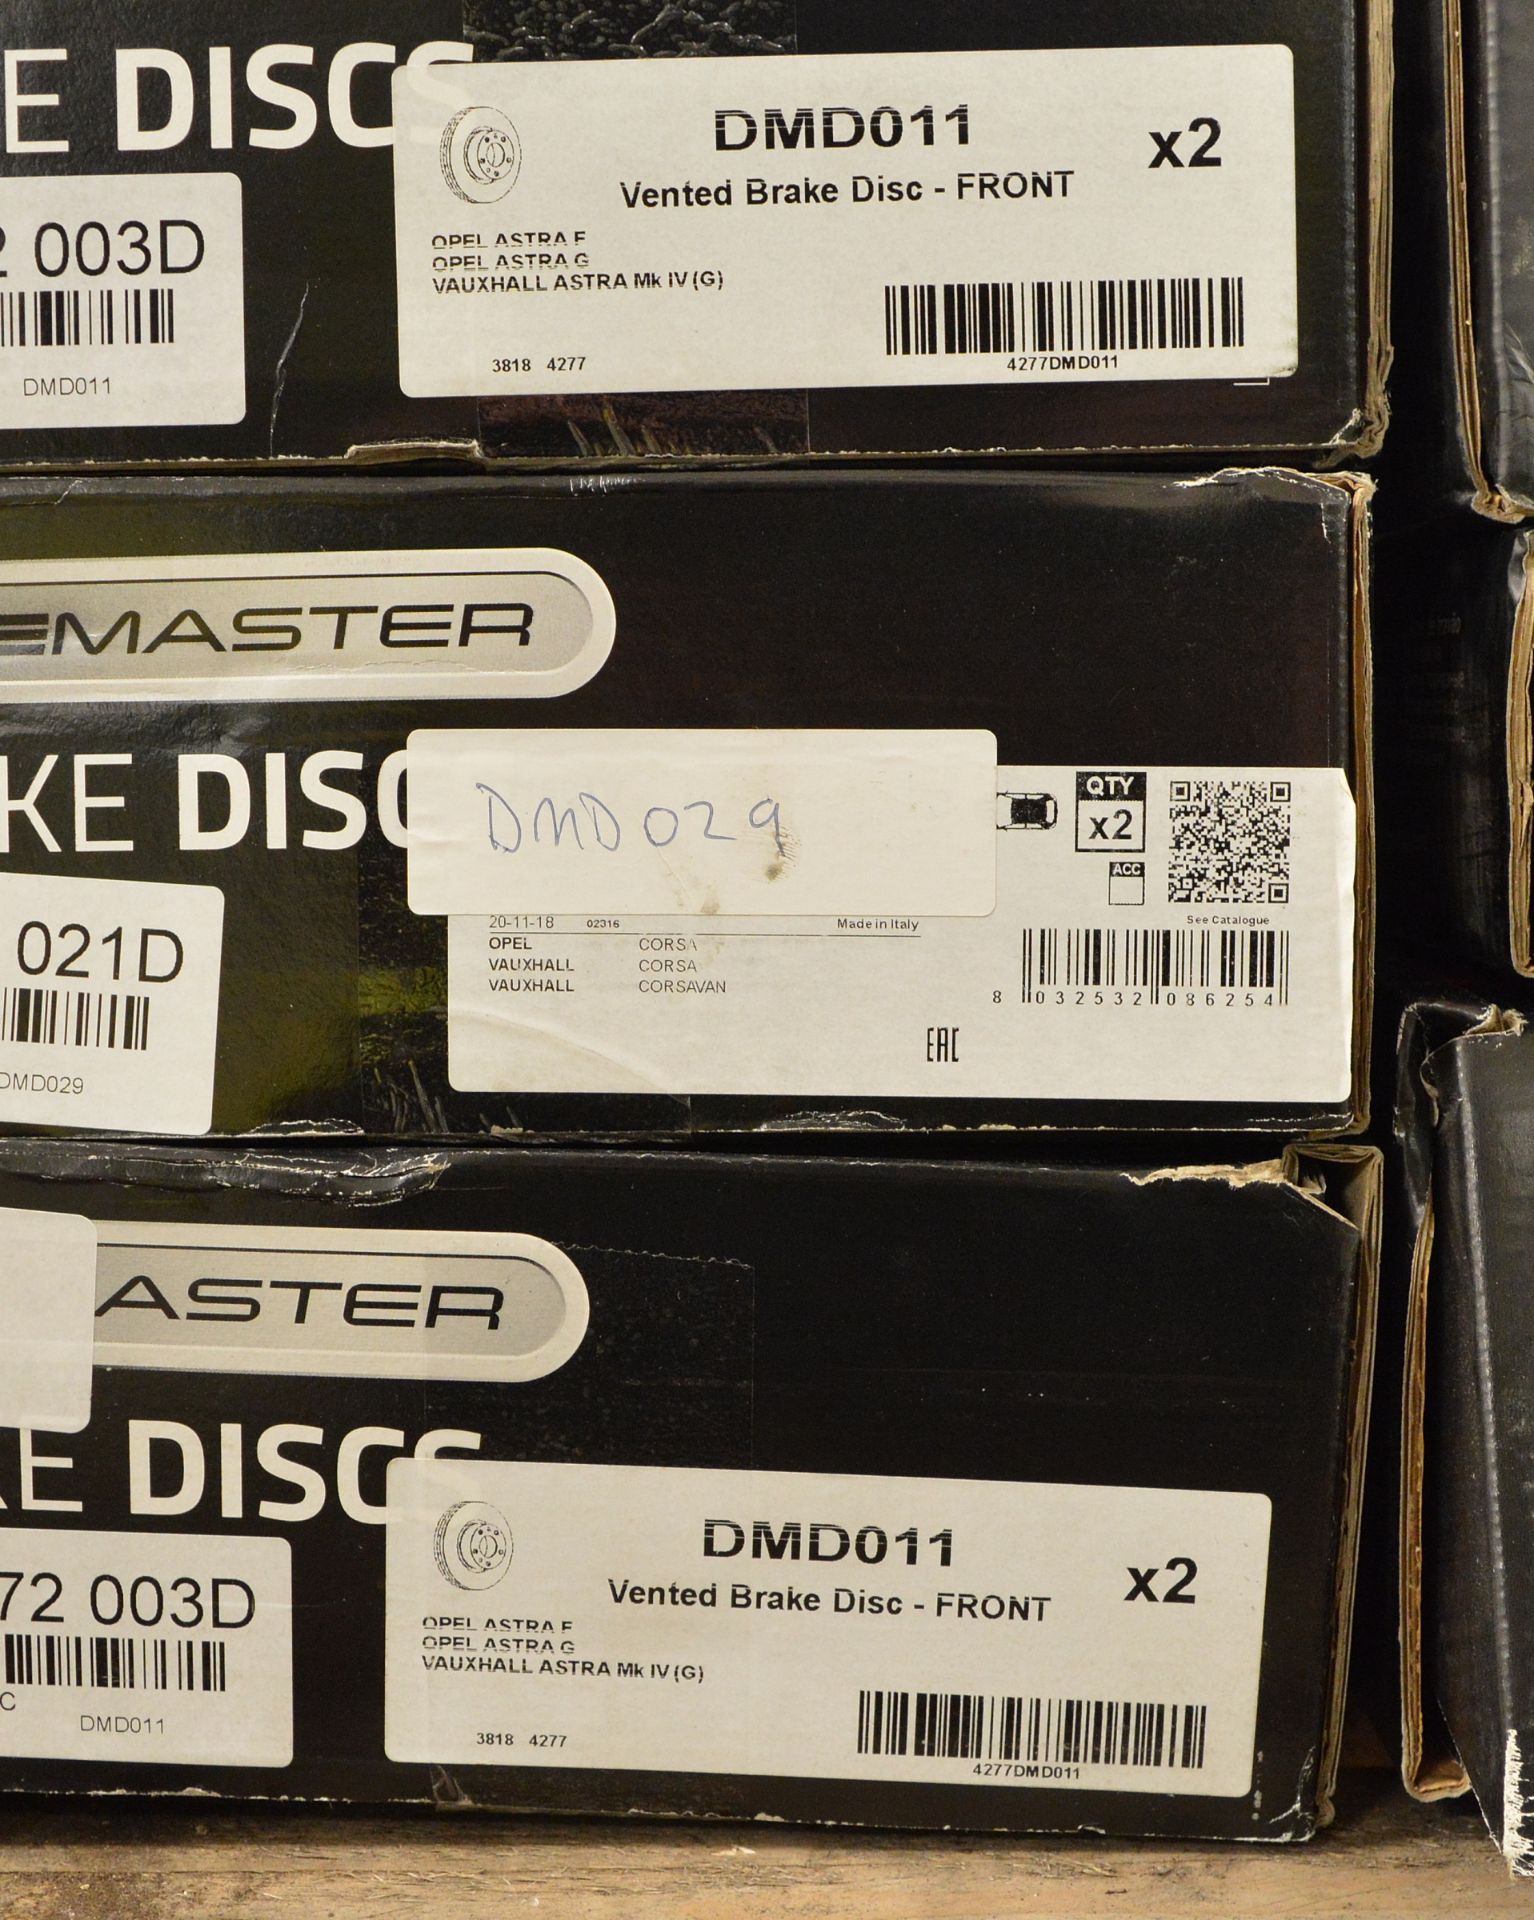 DriveMaster Brake Discs - See photos for part numbers - Image 9 of 13